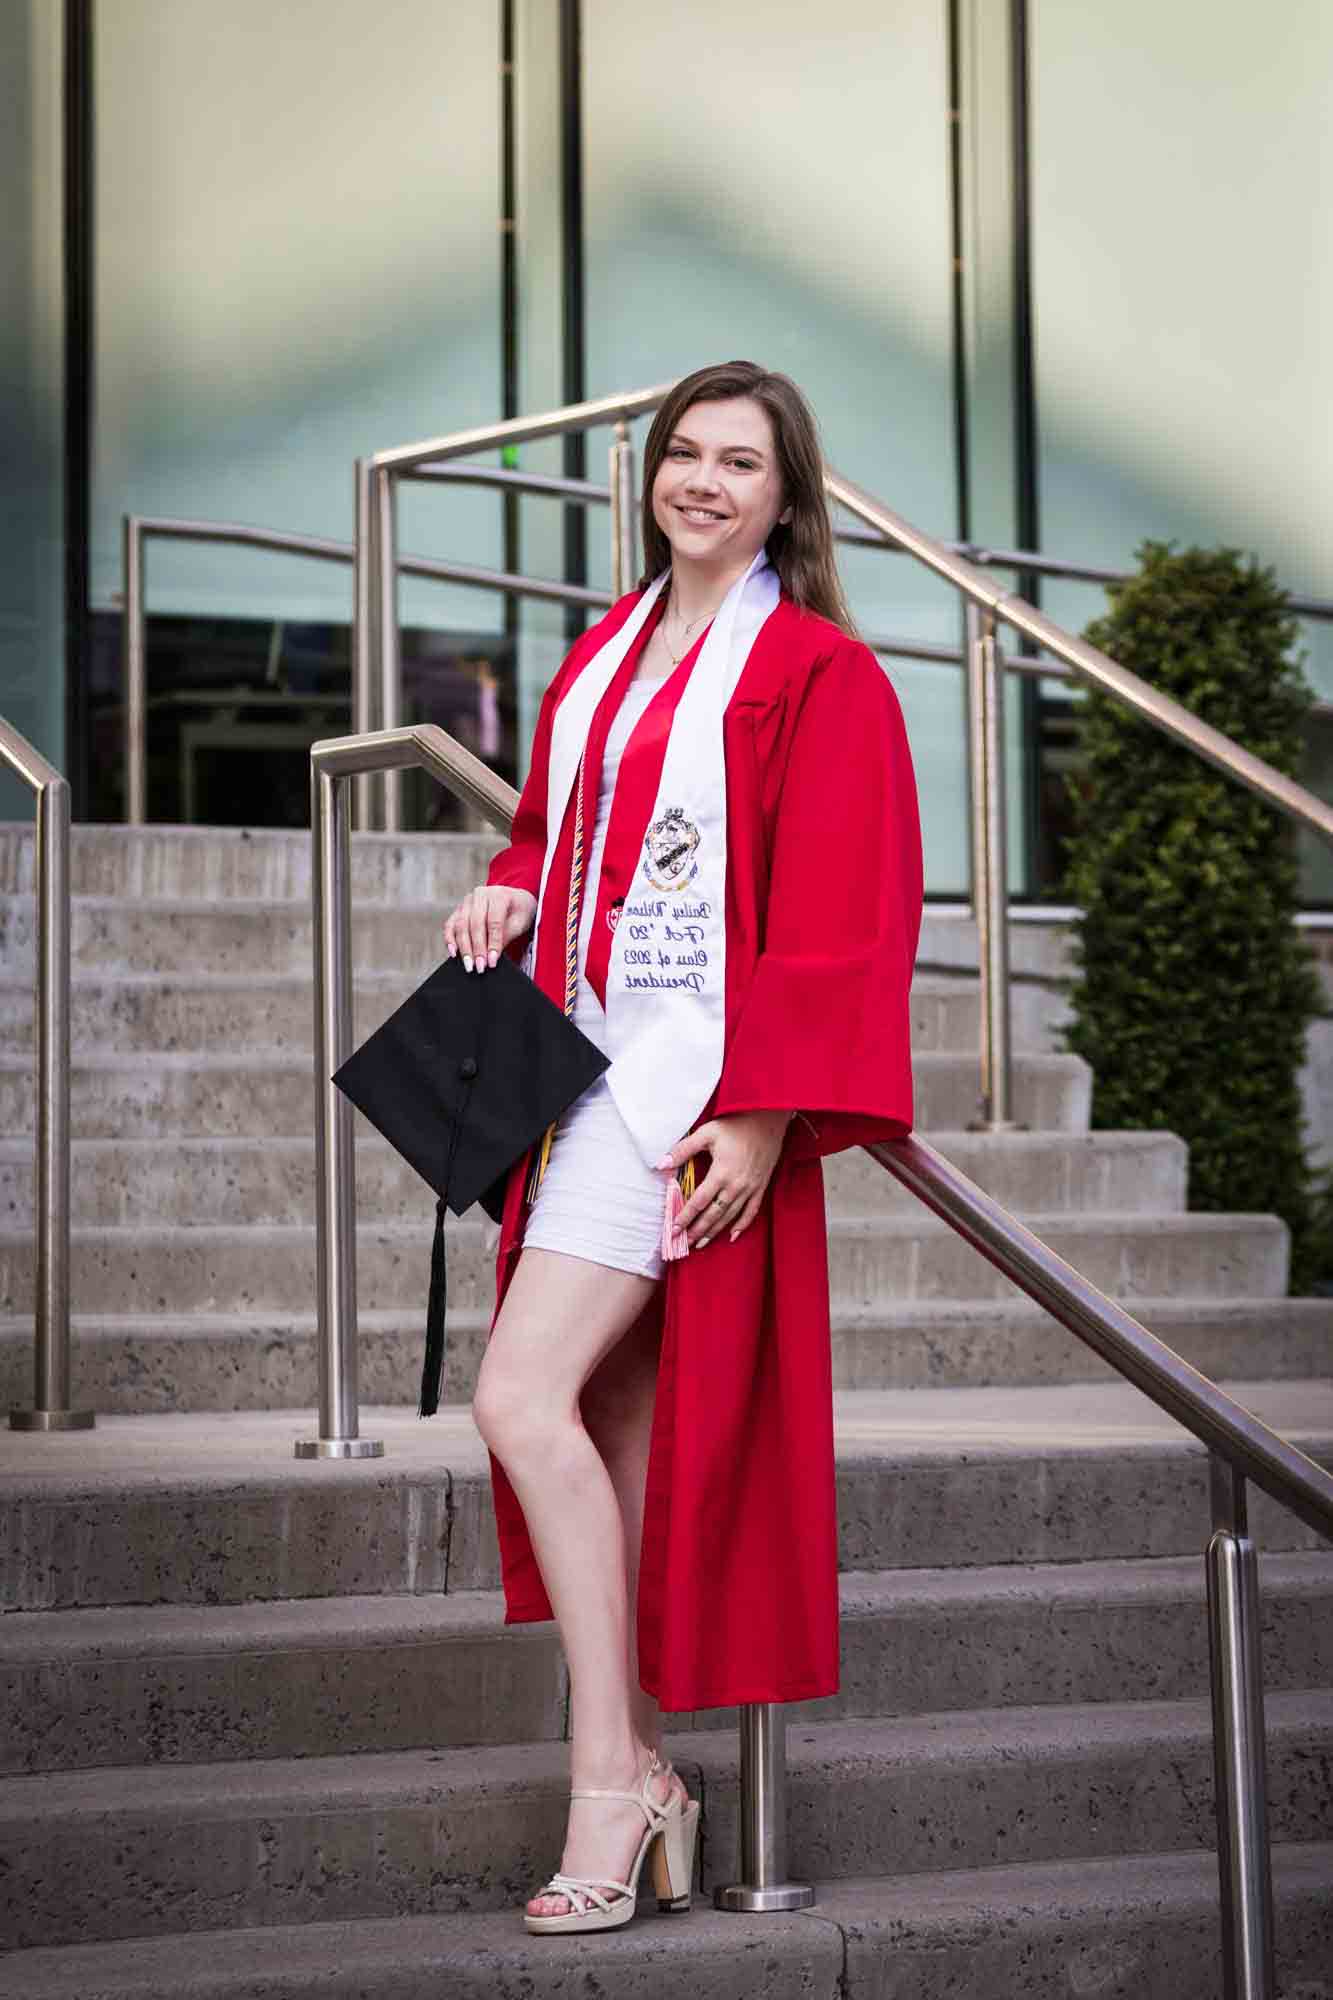 Female graduate wearing red robe and white sash holding cap on steps during a St. John’s University graduate portrait session